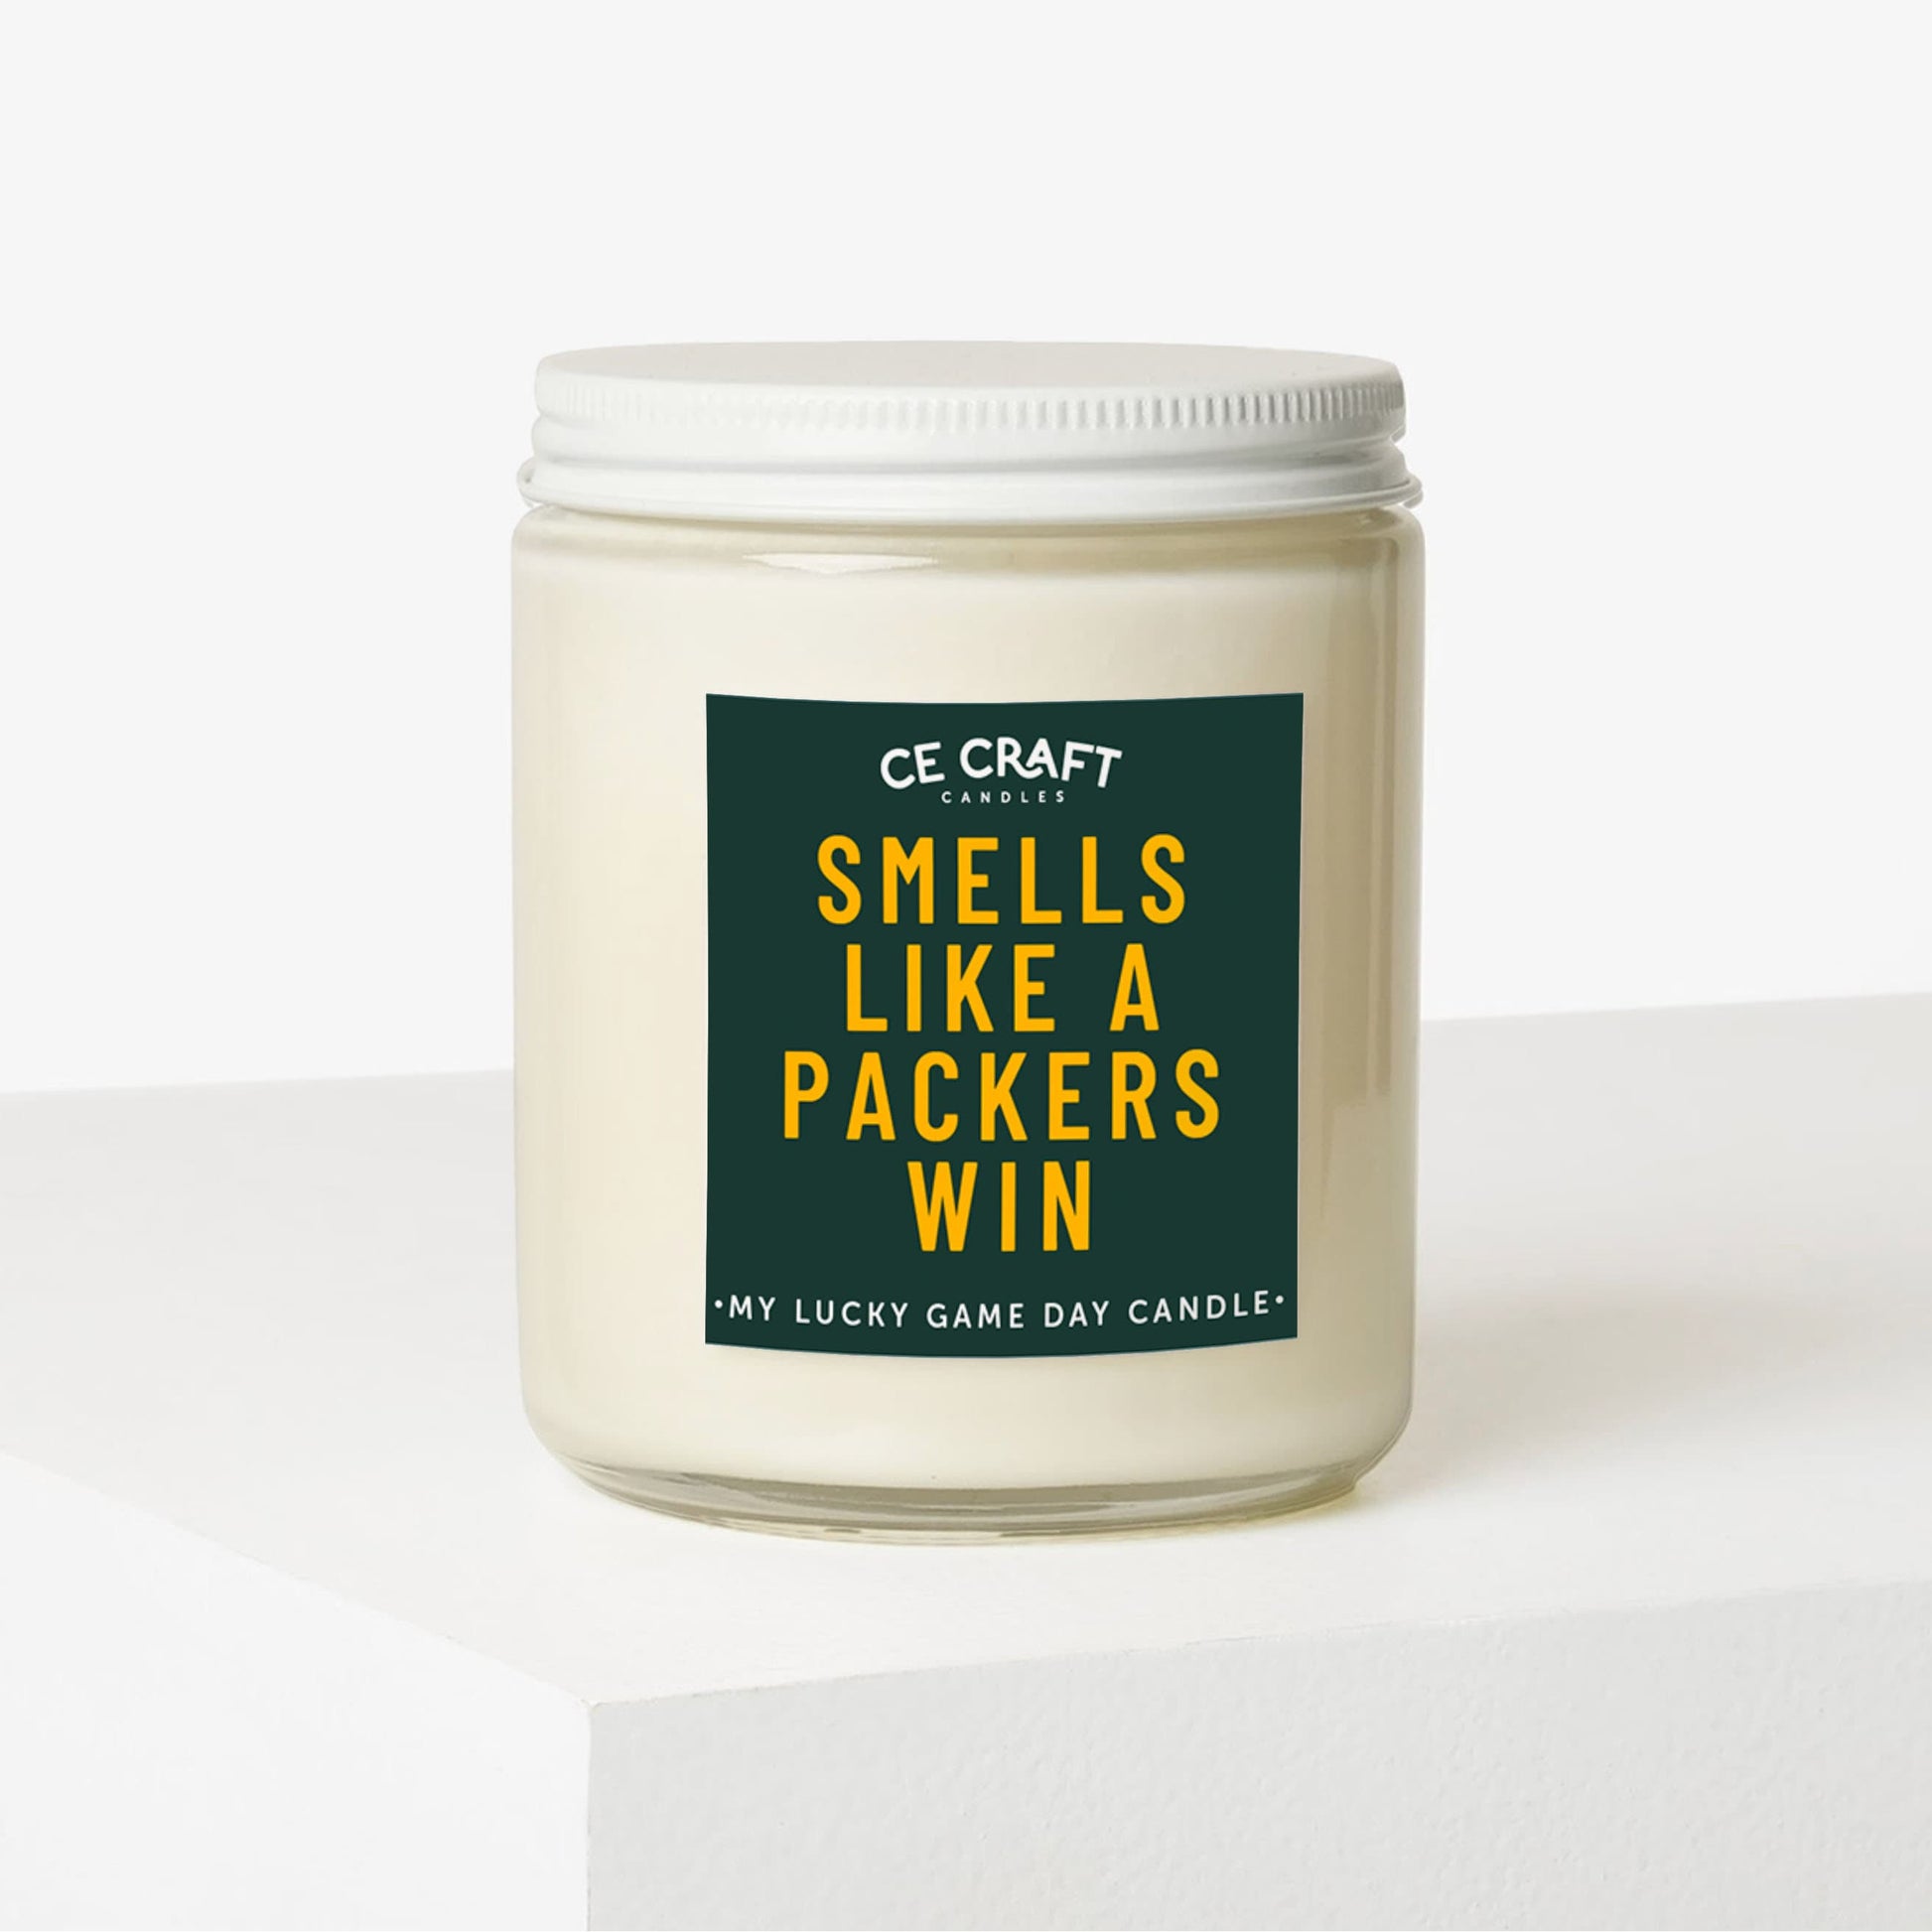 Smells Like a Packers Win Scented Candle C & E Craft Co 